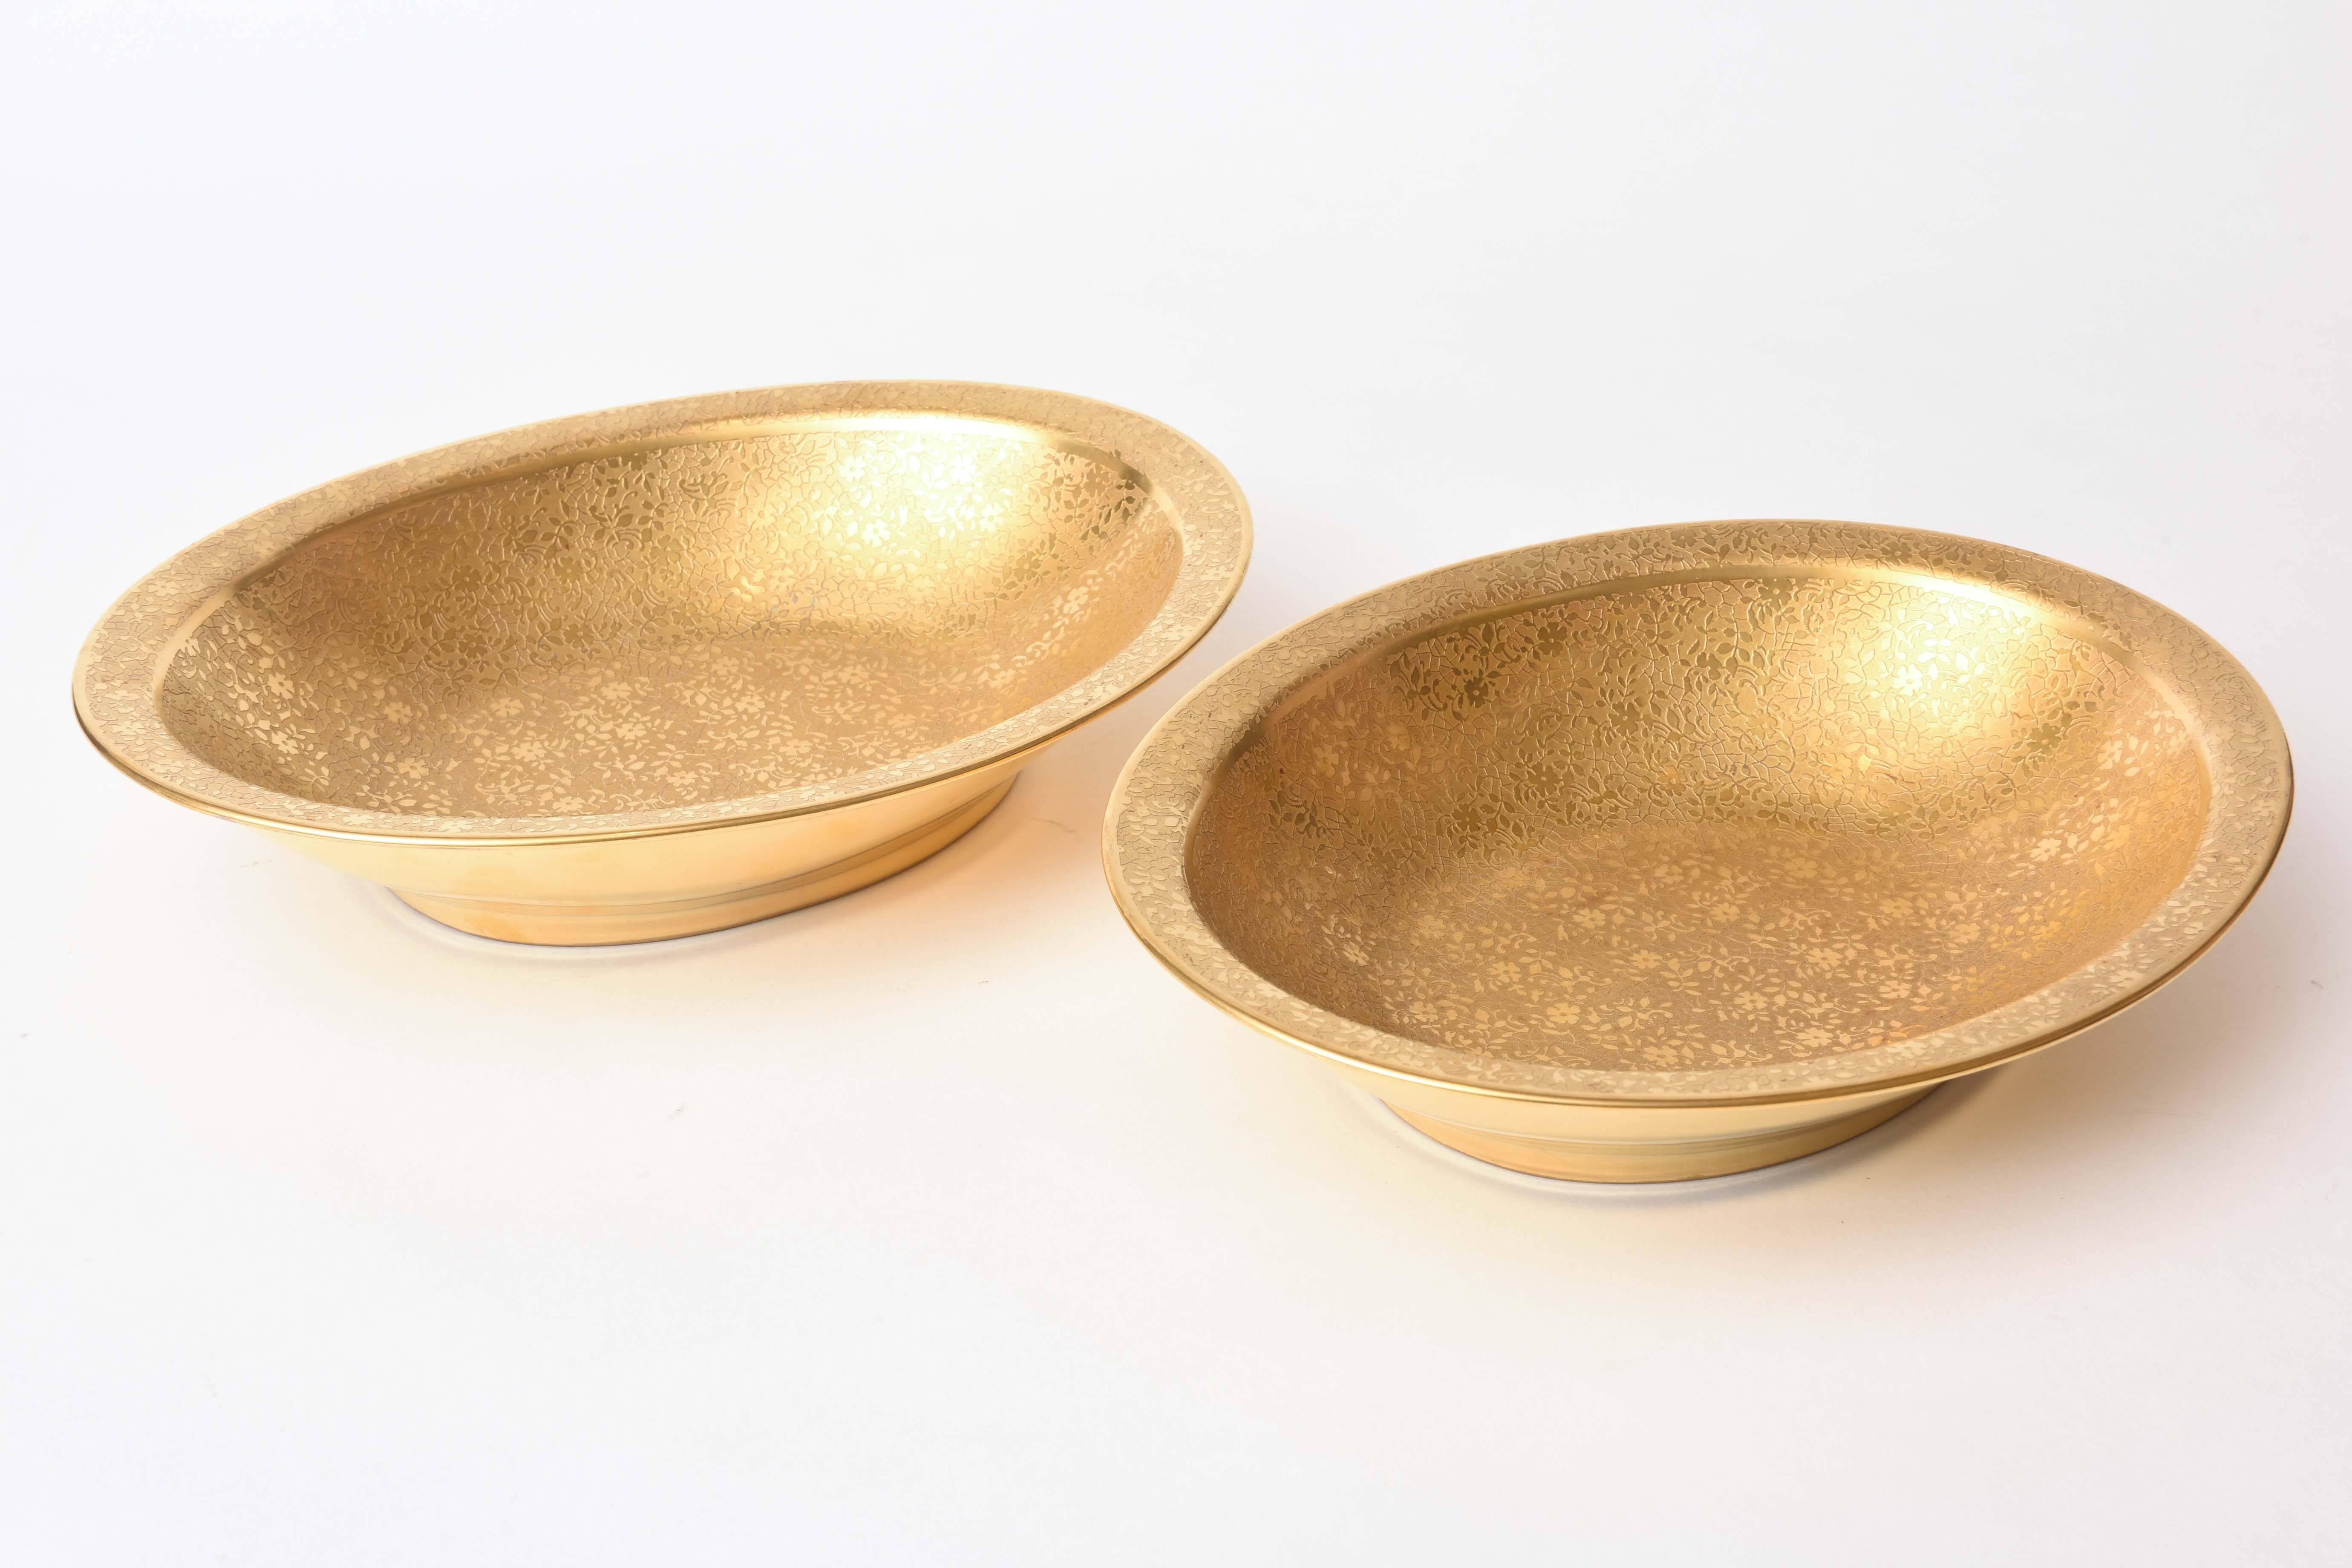 A pair of 24-karat acid etched gold on porcelain serving bowls. Antique and in wonderful condition. Perfect to use for your holiday table or simply stunning for display.